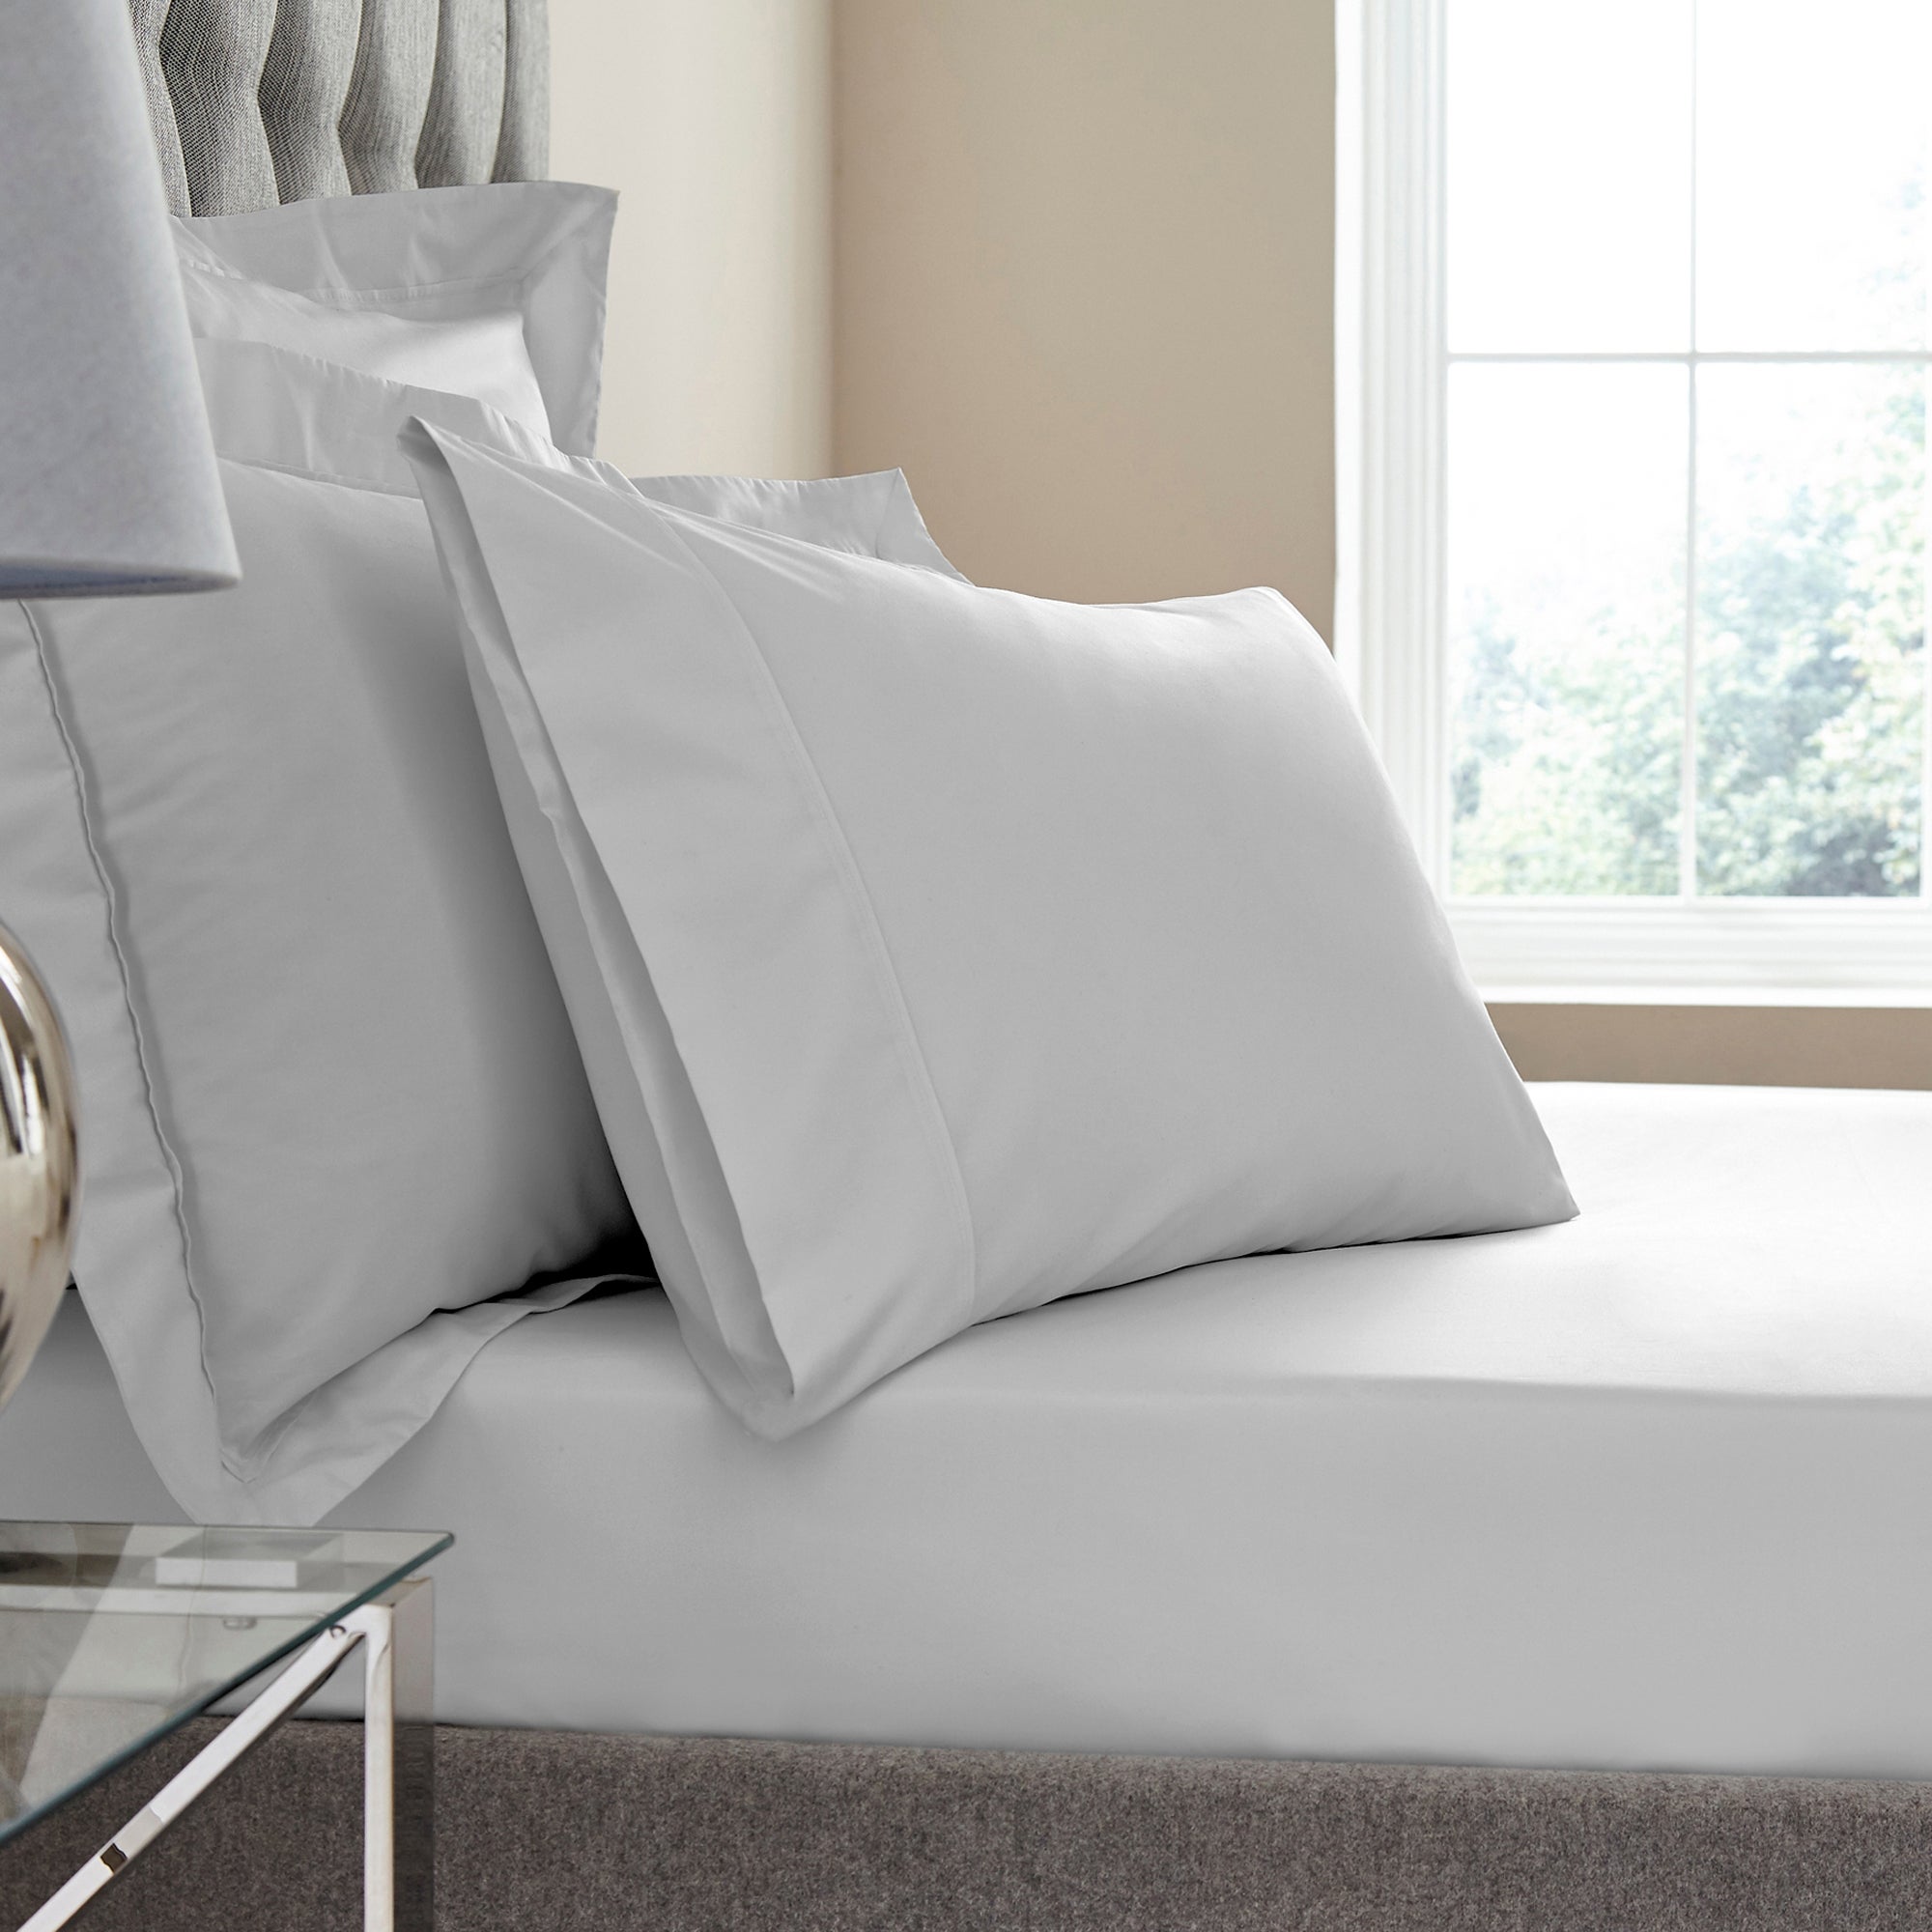 Dorma Egyptian Cotton 400 Thread Count Percale Fitted Sheet